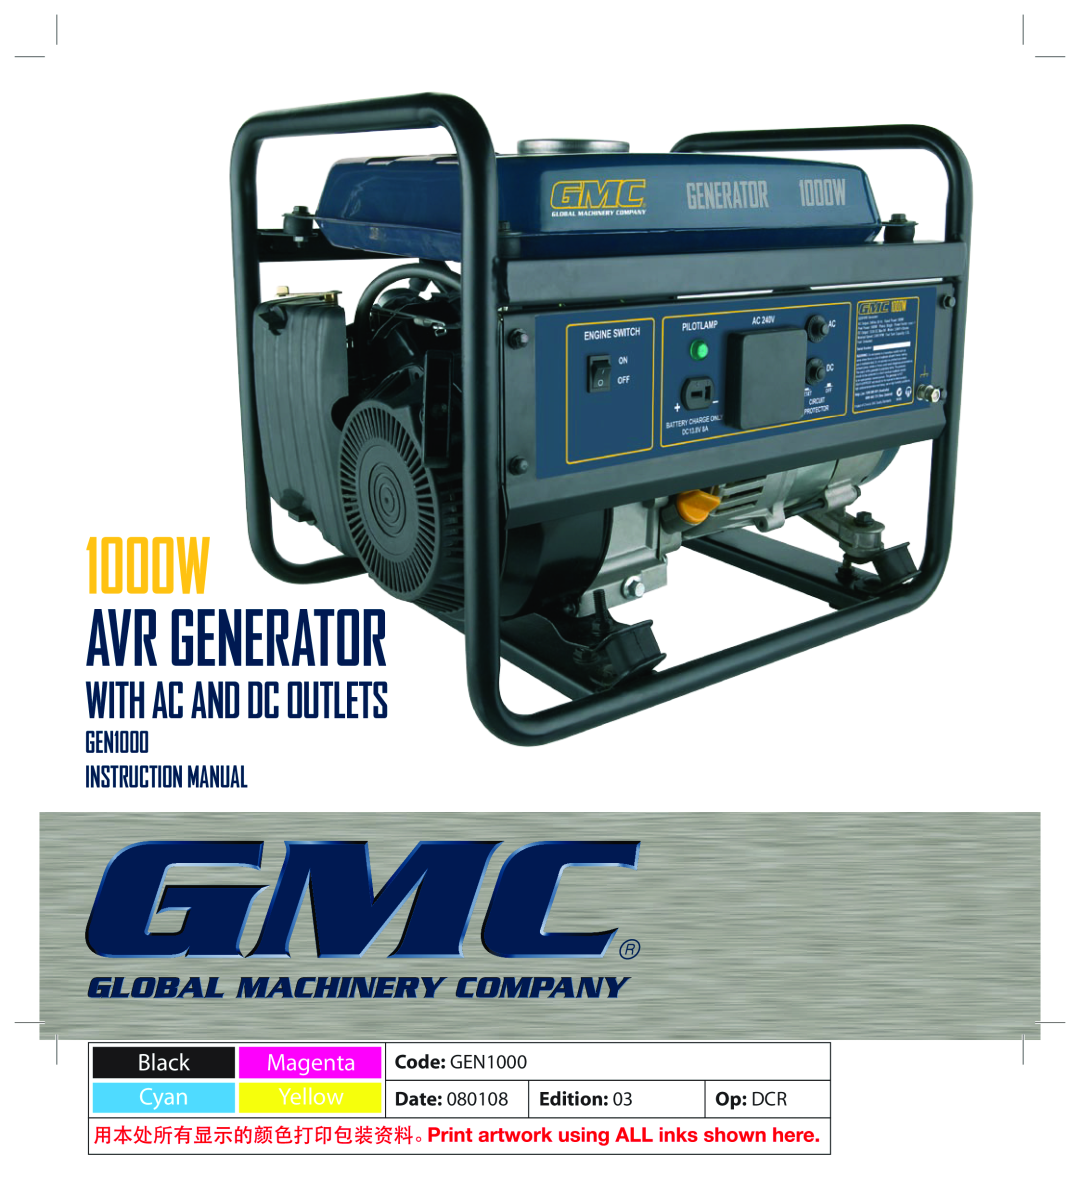 Global Machinery Company GEN1000 instruction manual Date, Edition, Op DCR, 1000W, Avr Generator, With Ac And Dc Outlets 